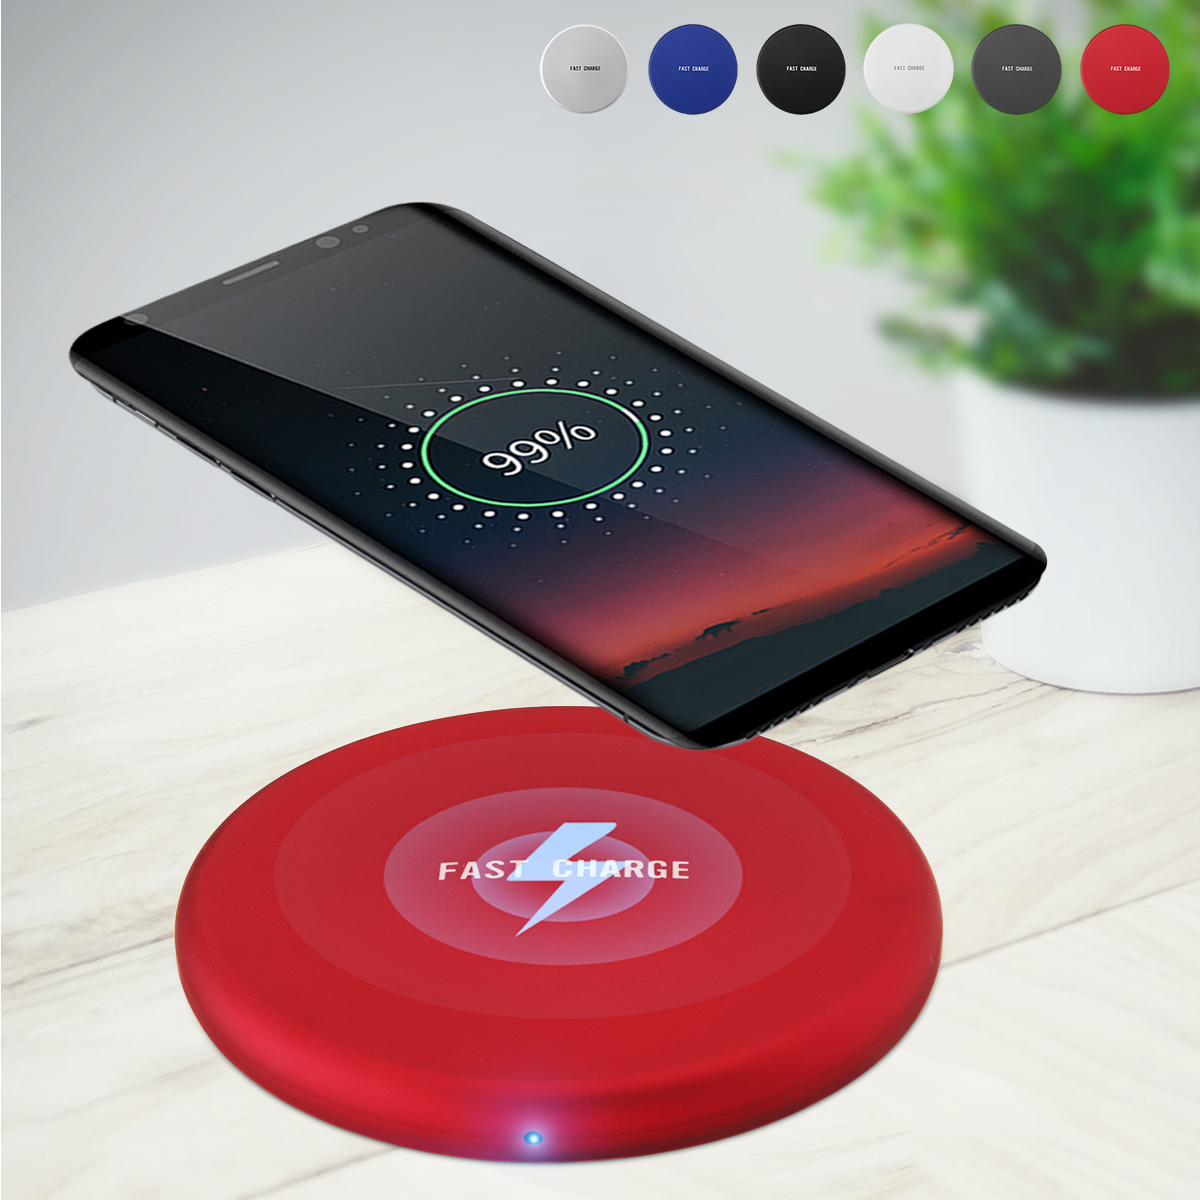 Bakeey Qi Wireless Charger With LED Indicator For iPhone X 8Plus Samsung S8 S7 Note 8